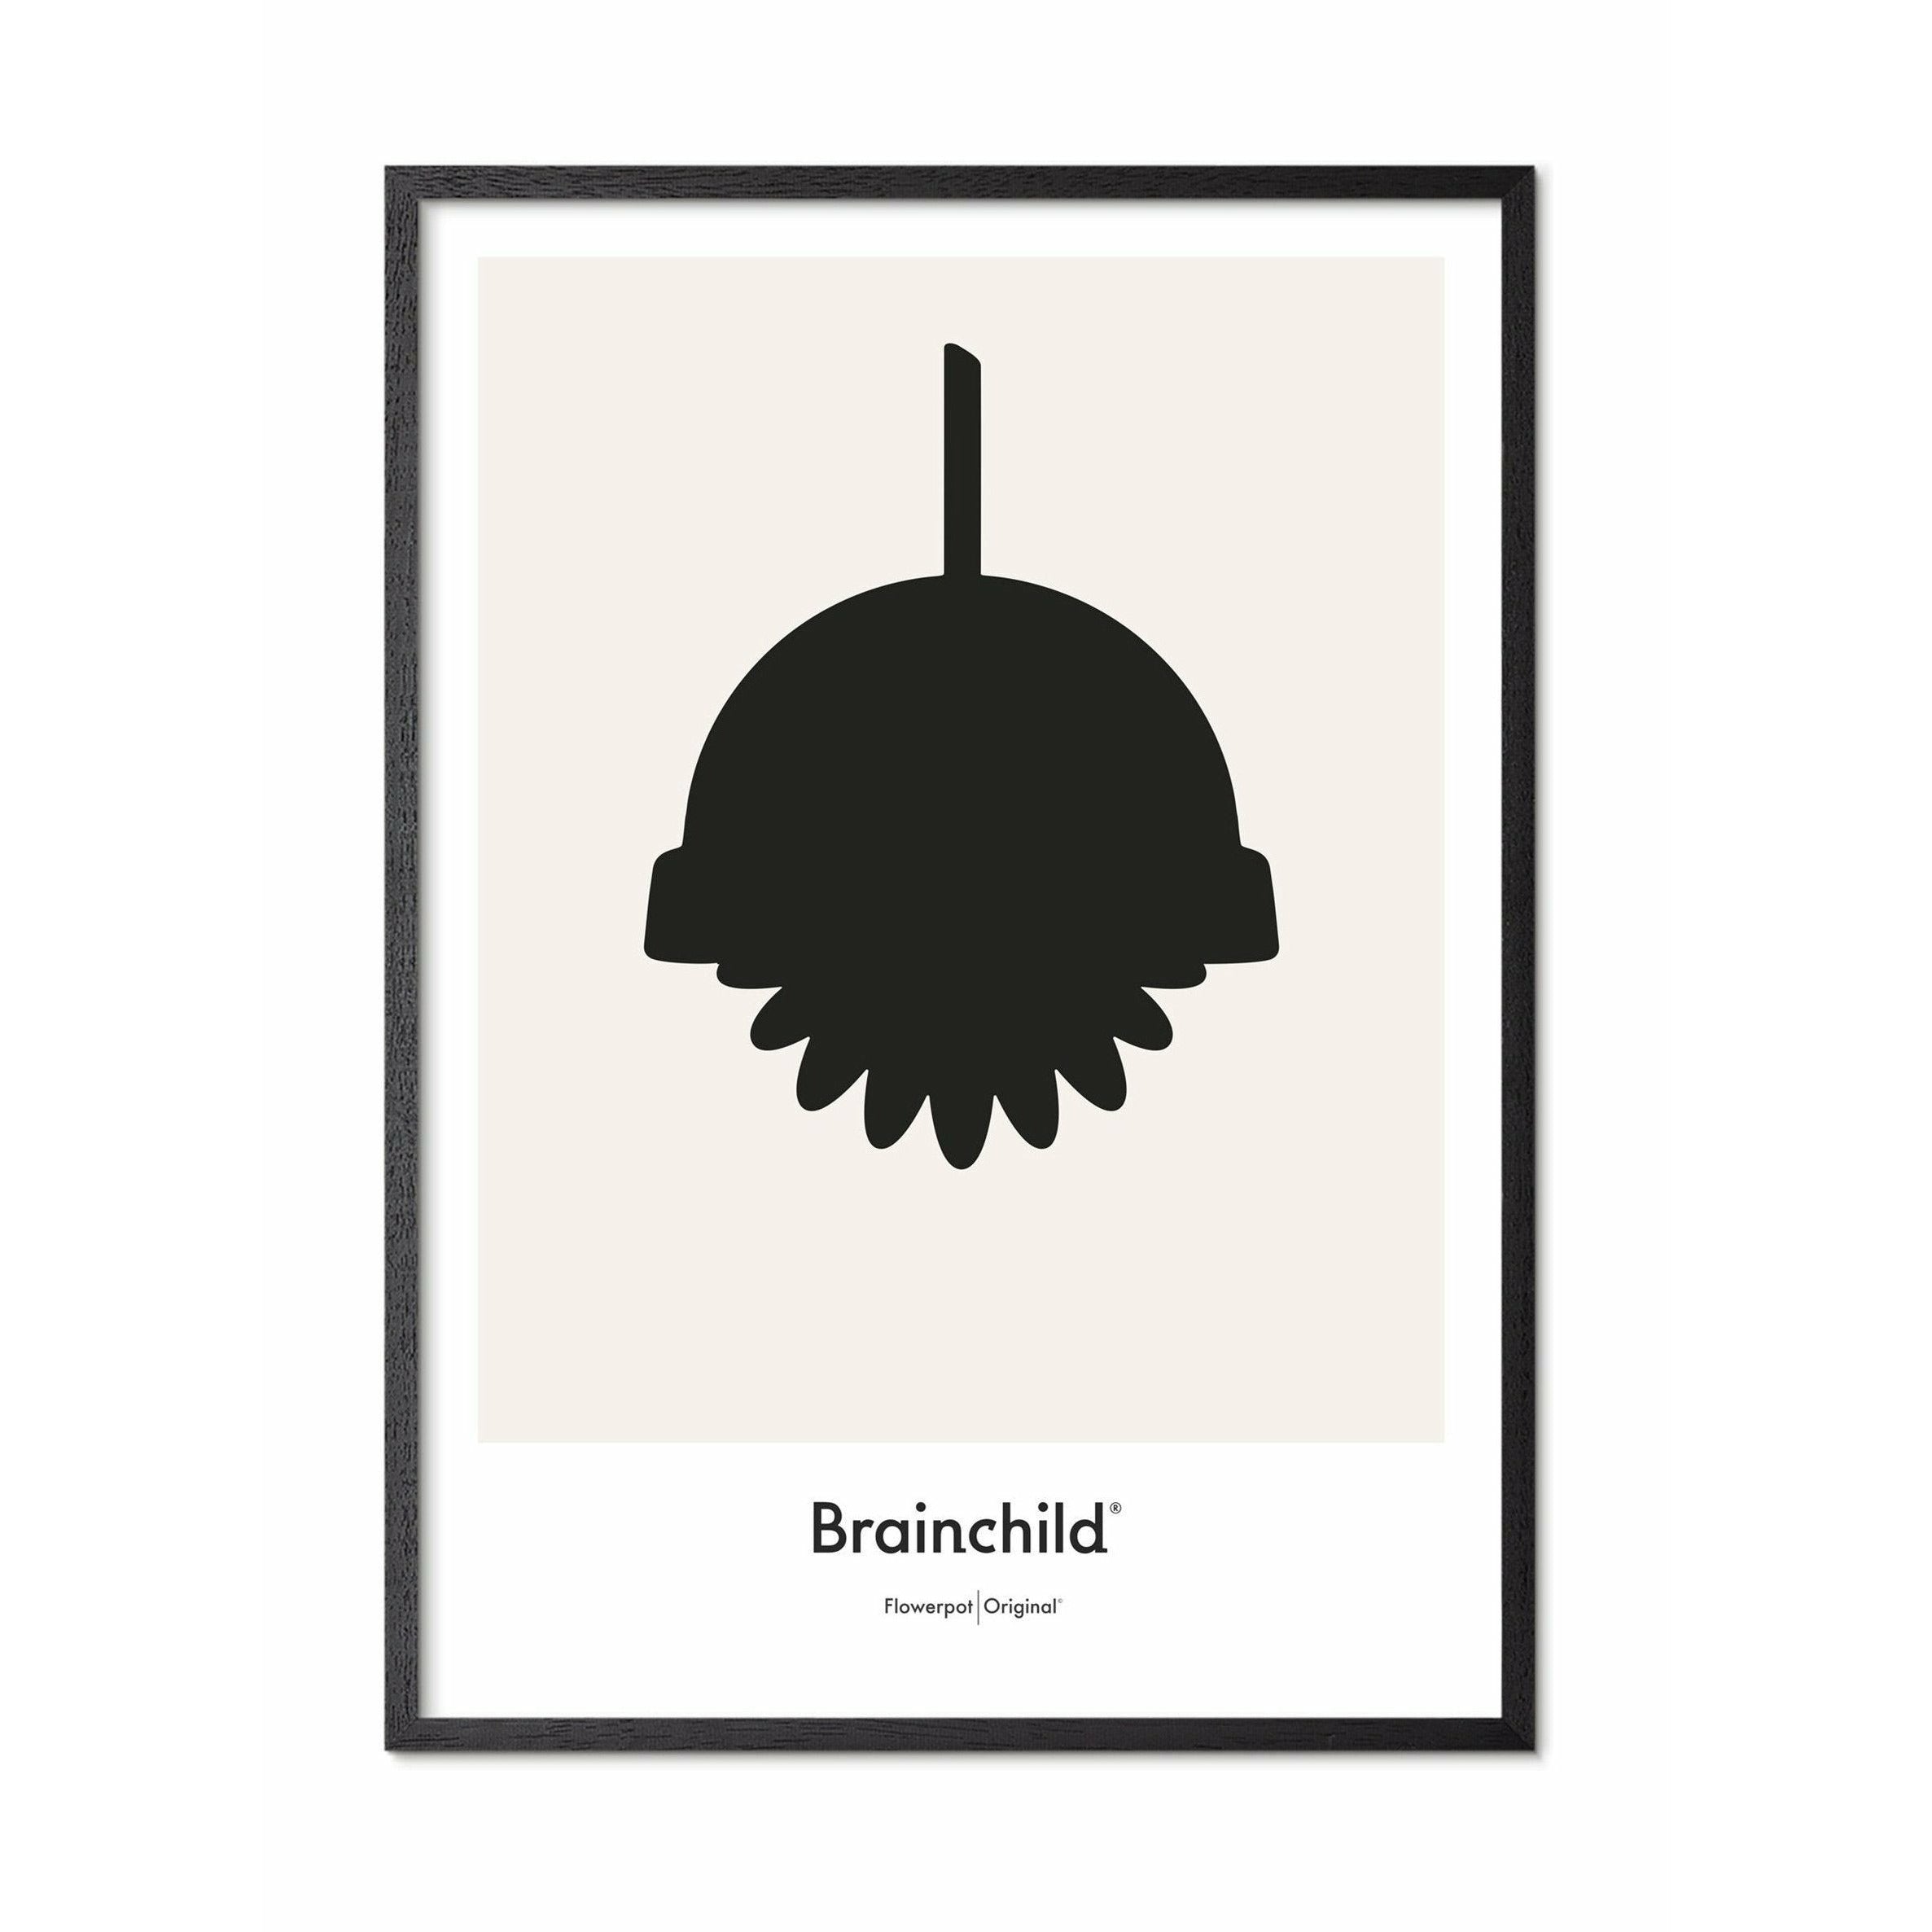 Brainchild Flowerpot Design Icon Poster, Frame in Black Lacquered Wood A5, Gray